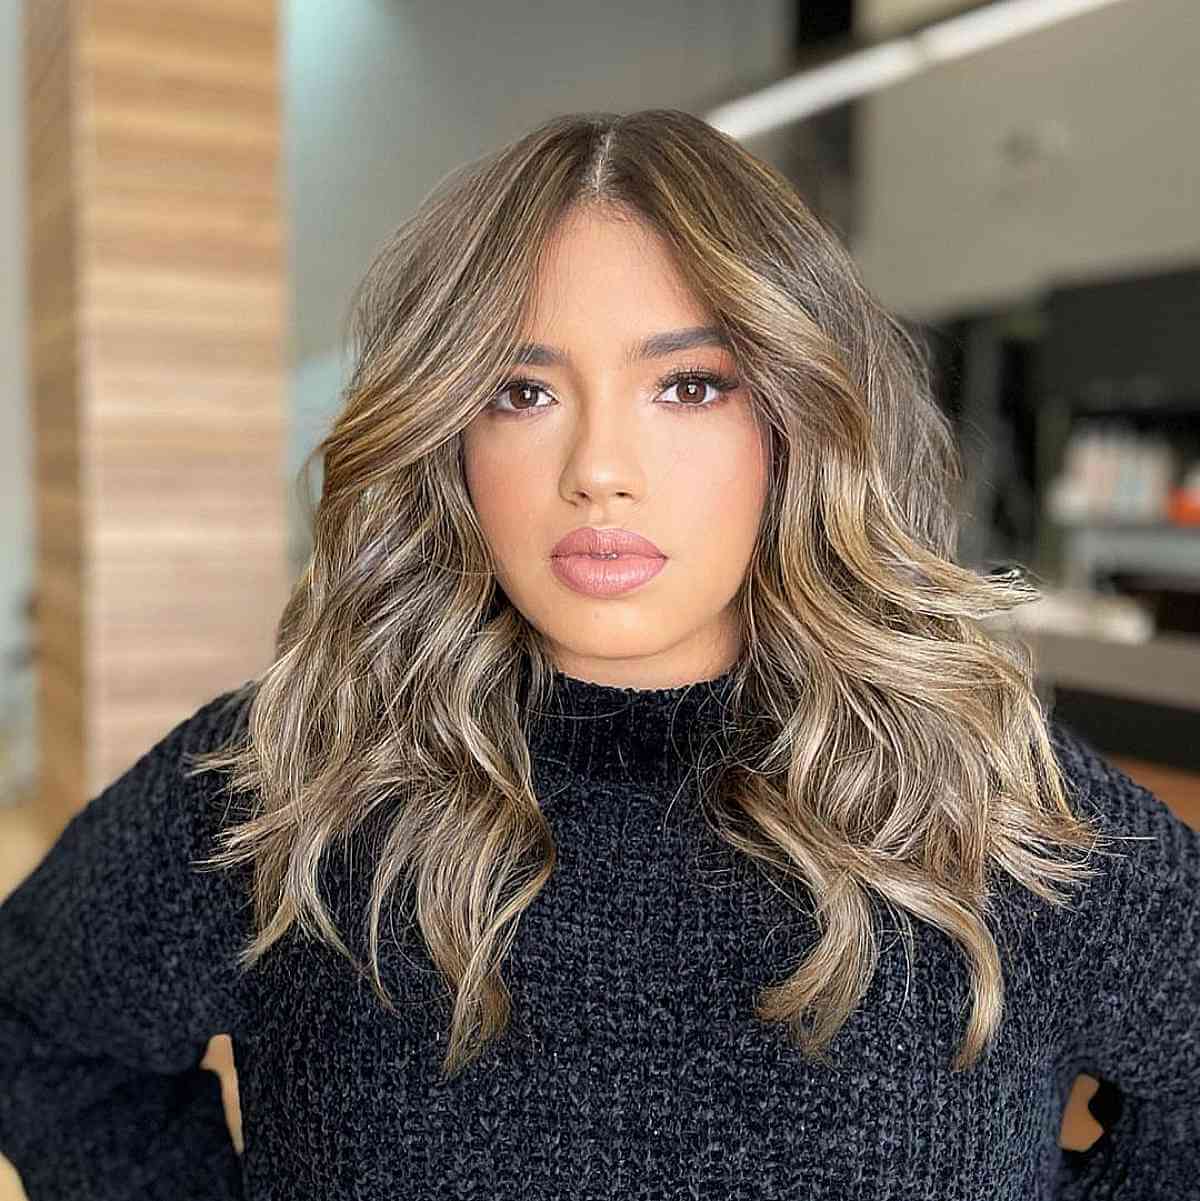 The Perfect Blowout Brown Hair with Blonde Highlights